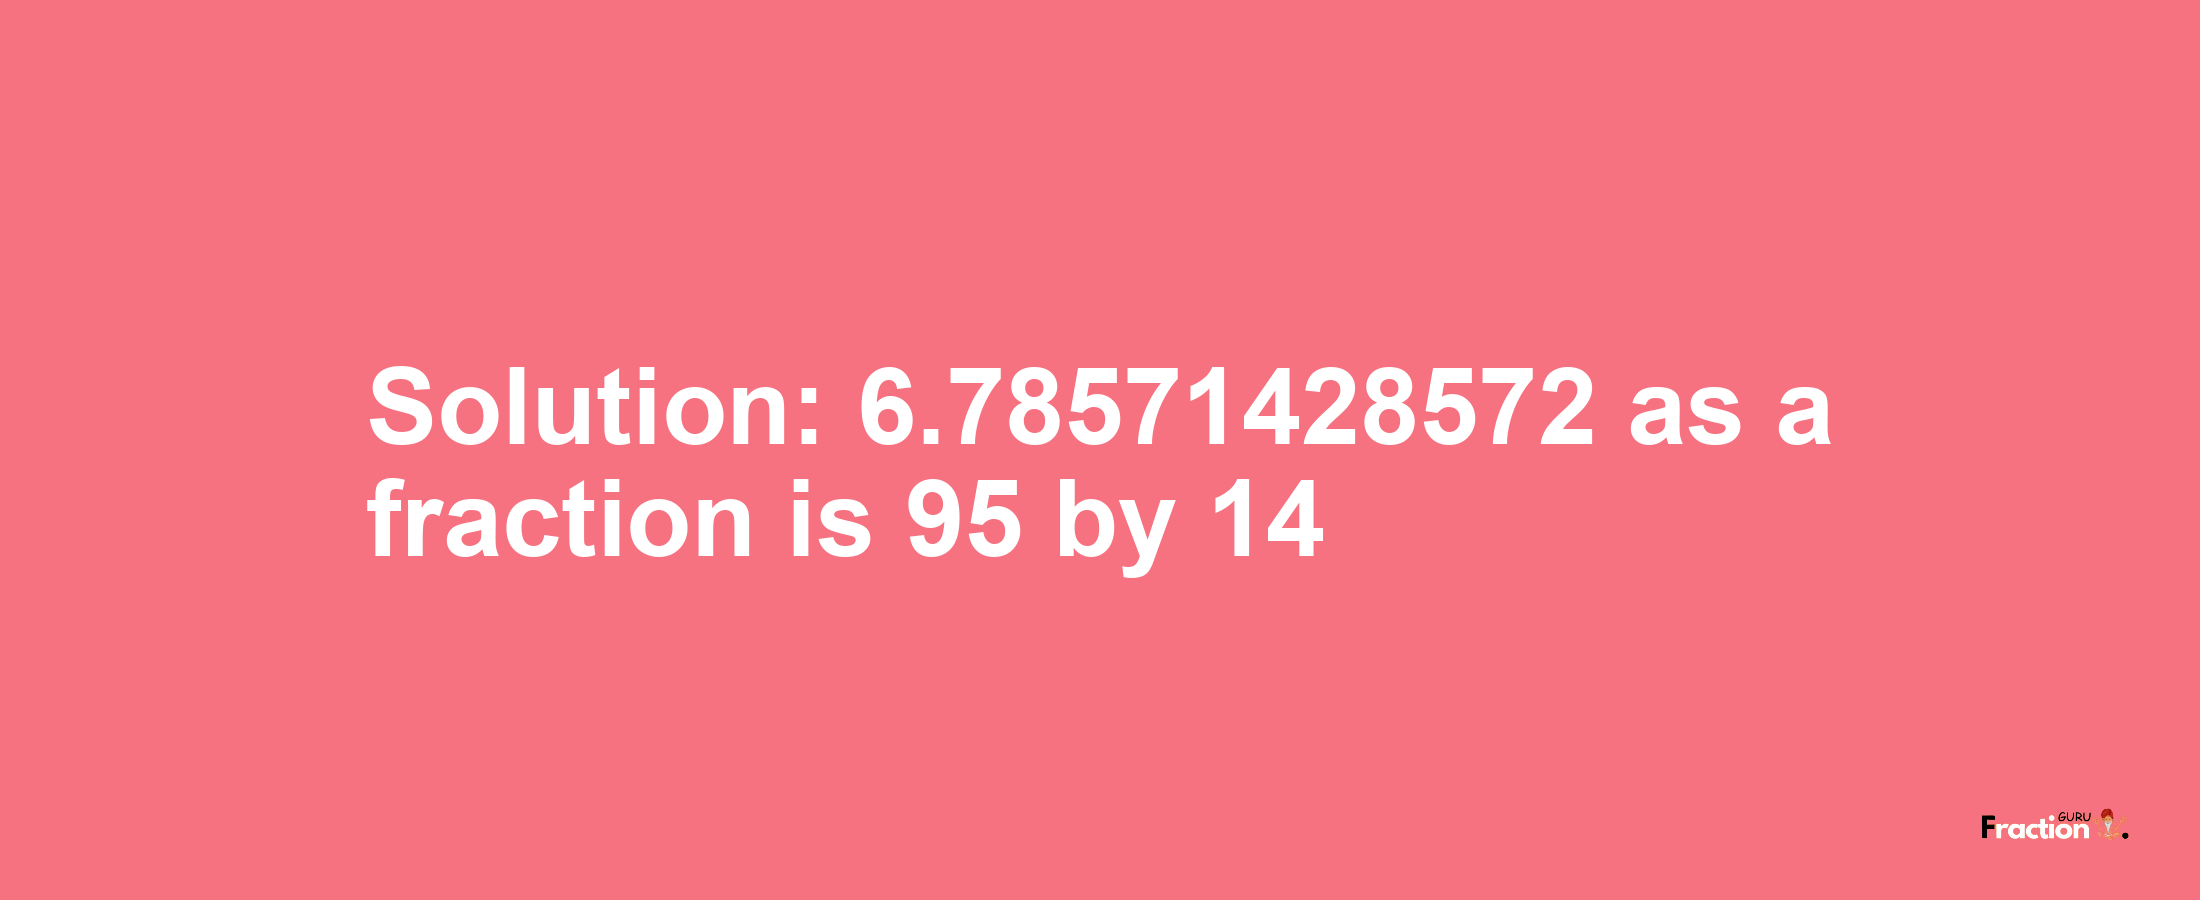 Solution:6.78571428572 as a fraction is 95/14